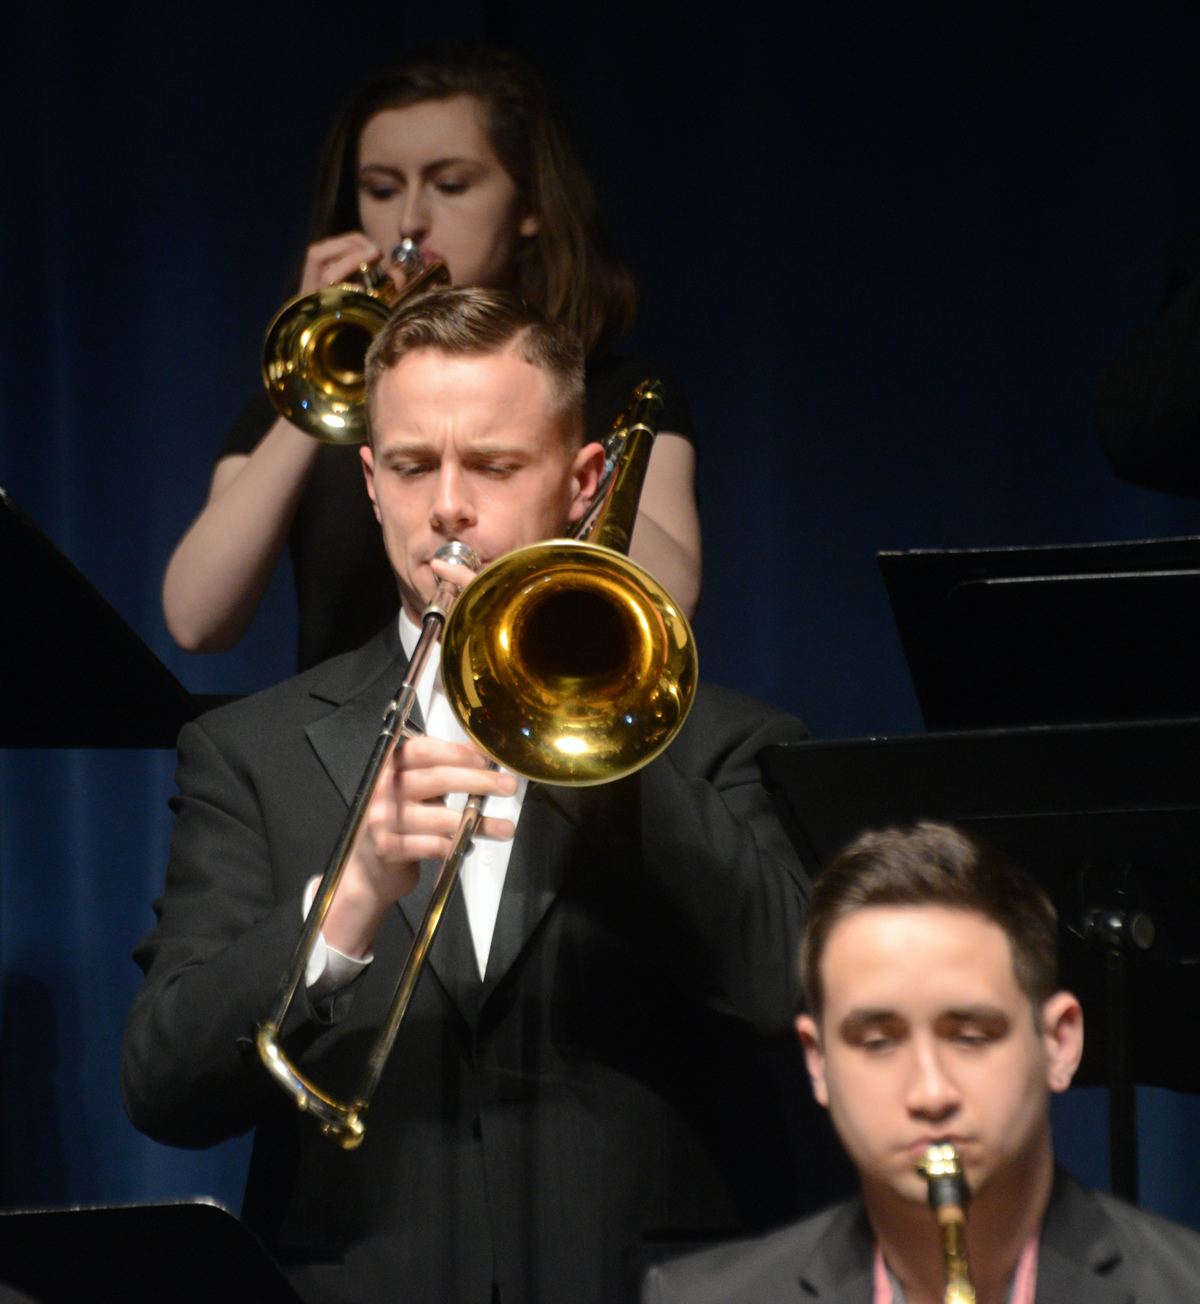 UMass Lowell Band members playing Jazz Classical with a Trumpet and Trombone pictured.